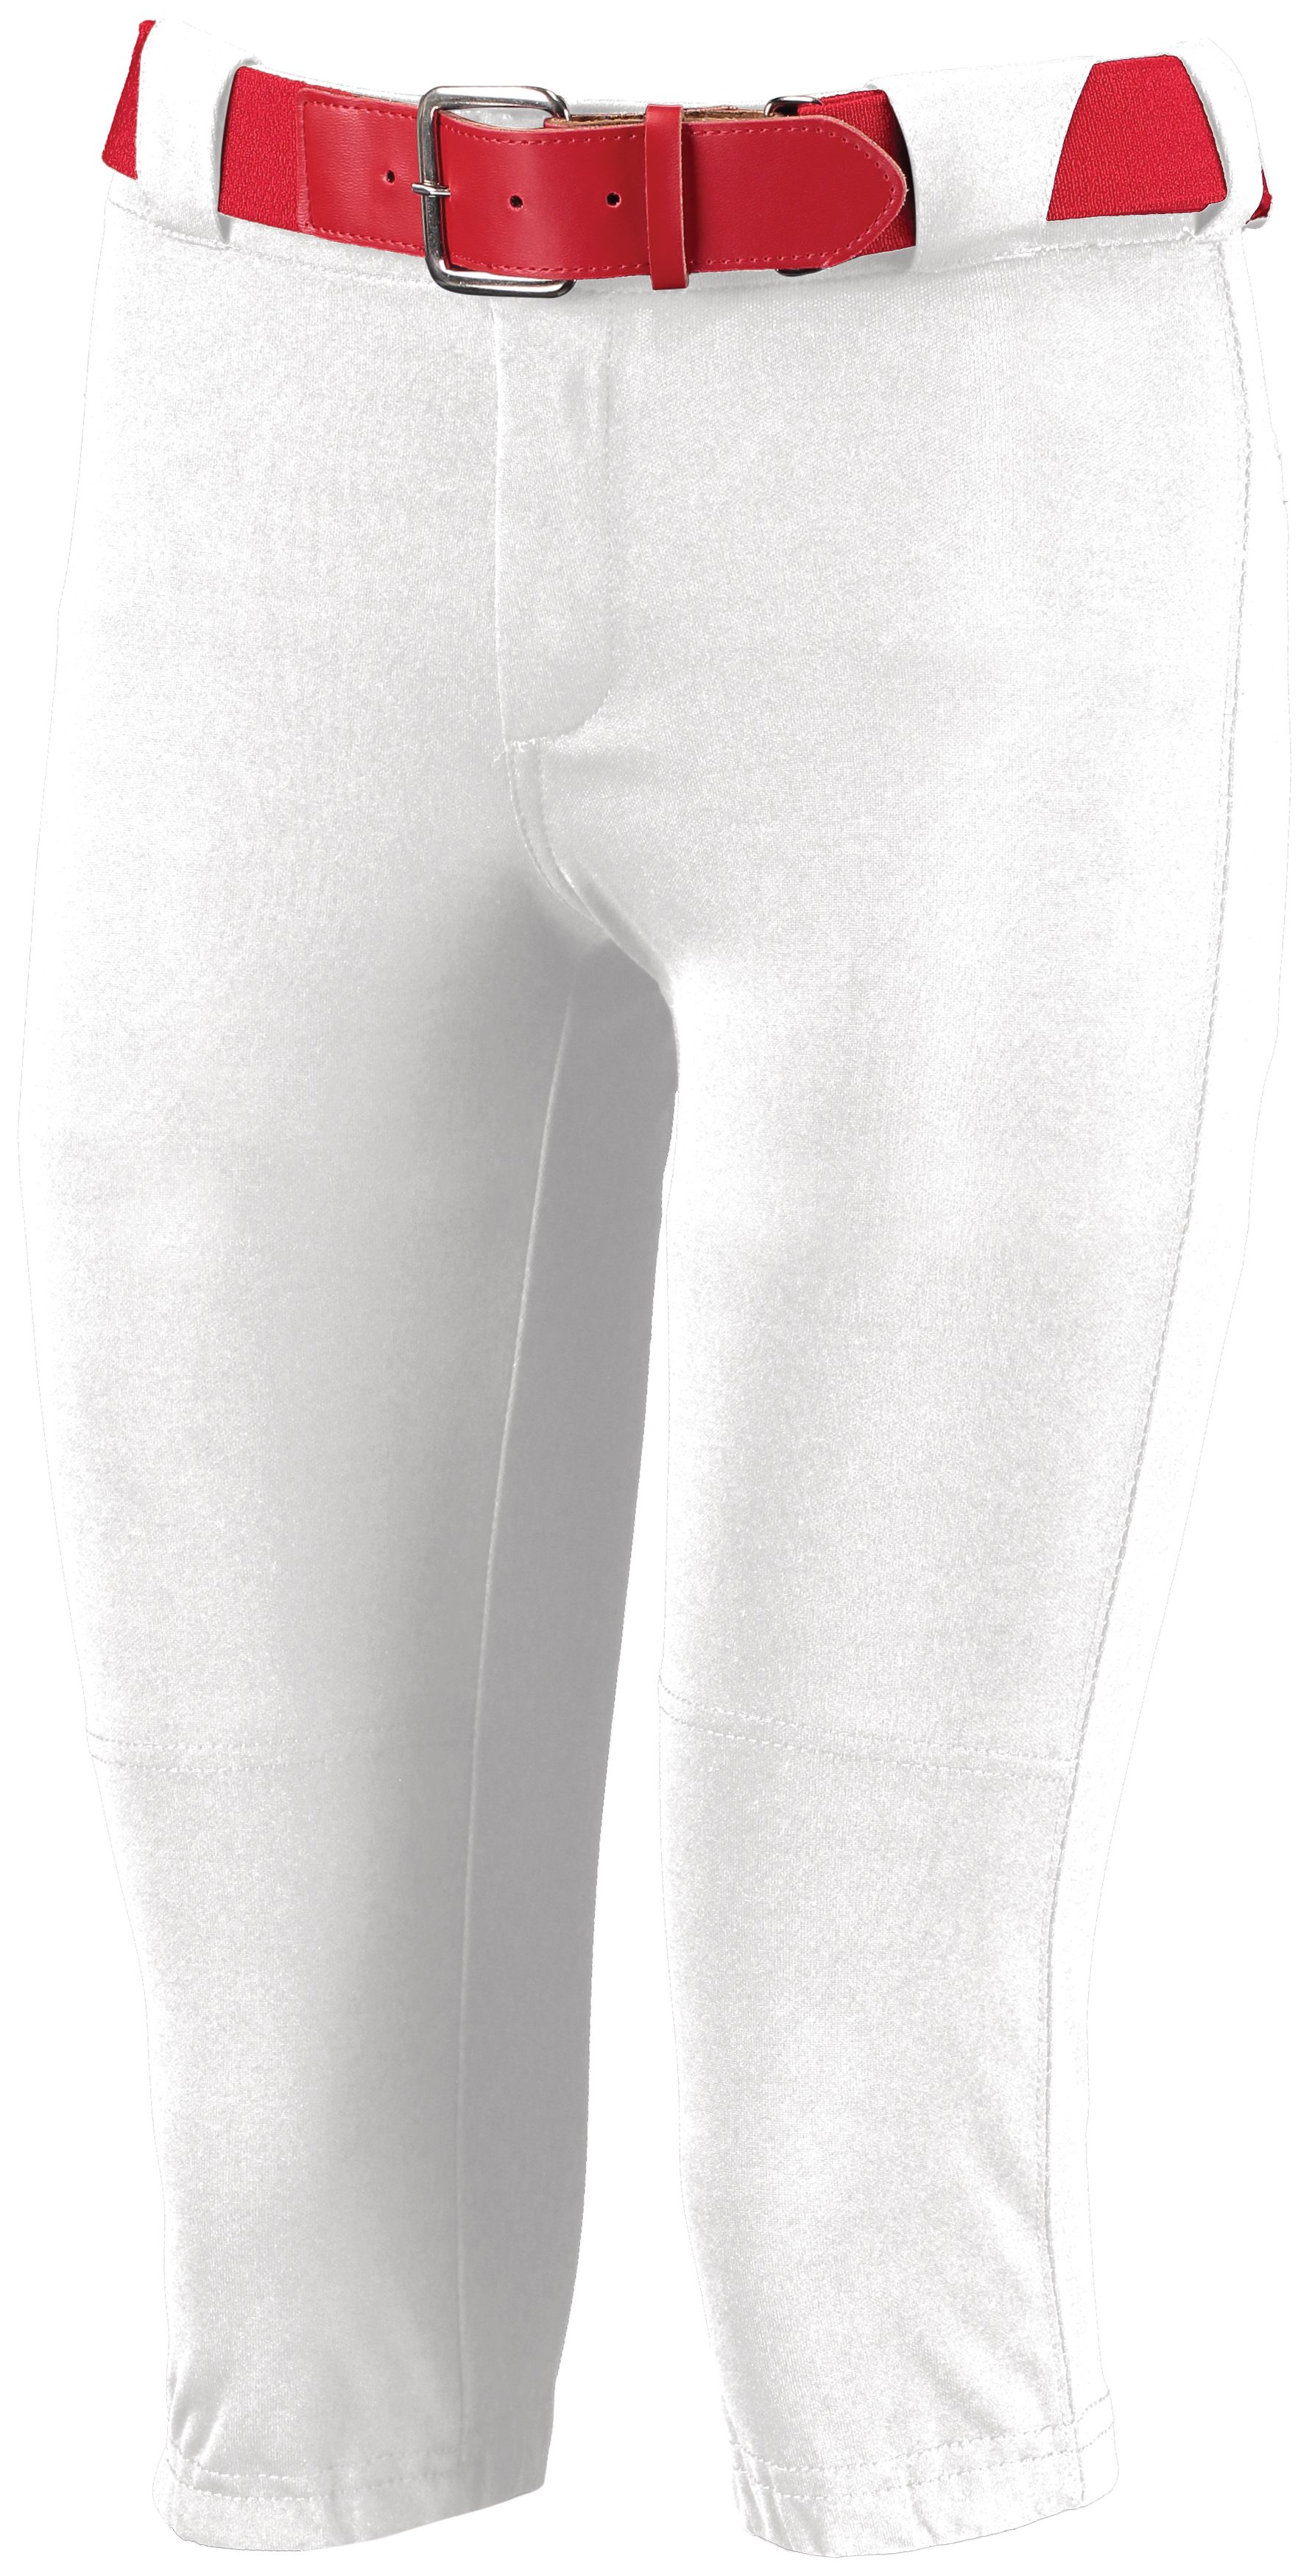 Russell Athletic 7S4DBX - Ladies Low Rise Knicker Length Softball Pant